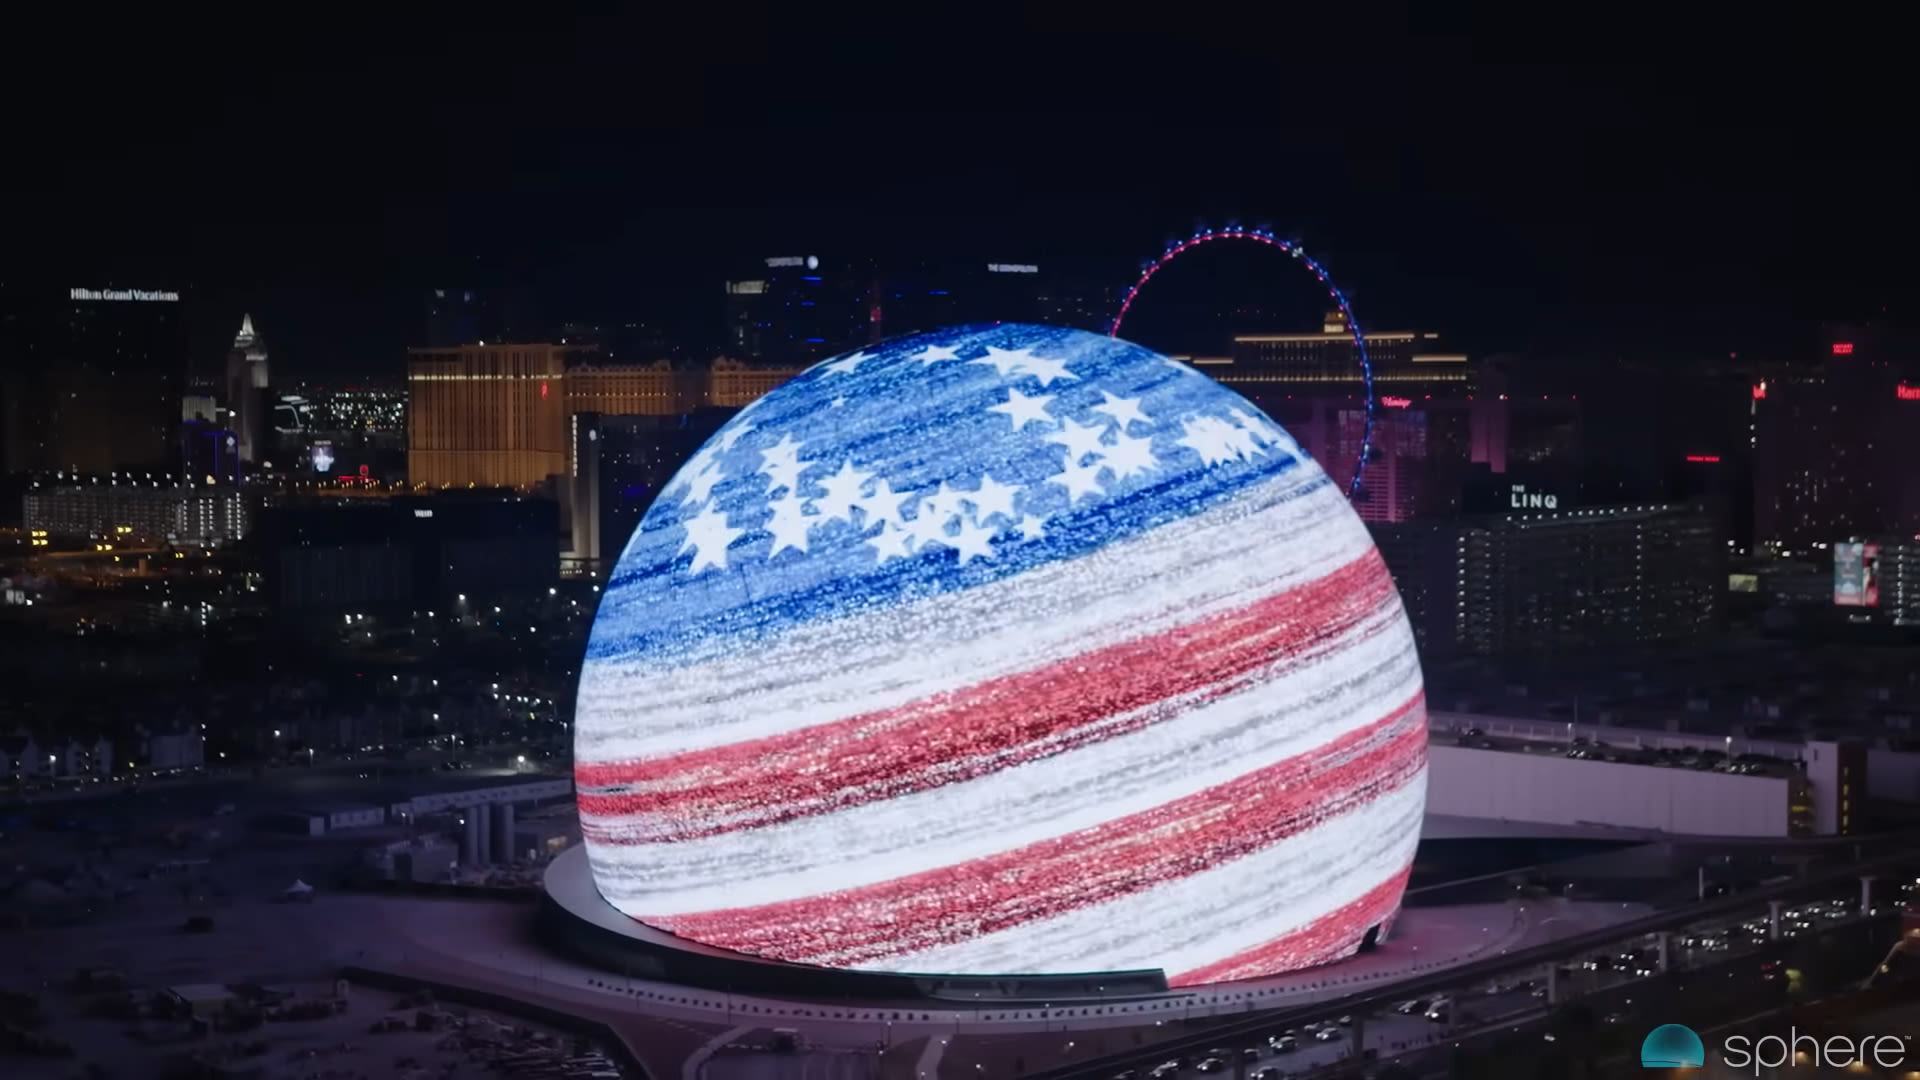 Las Vegas' dystopia-sphere, powered by 150 Nvidia GPUs and drawing up to 28,000,000 watts, is both a testament to the hubris of humanity and an admittedly impressive technical feat